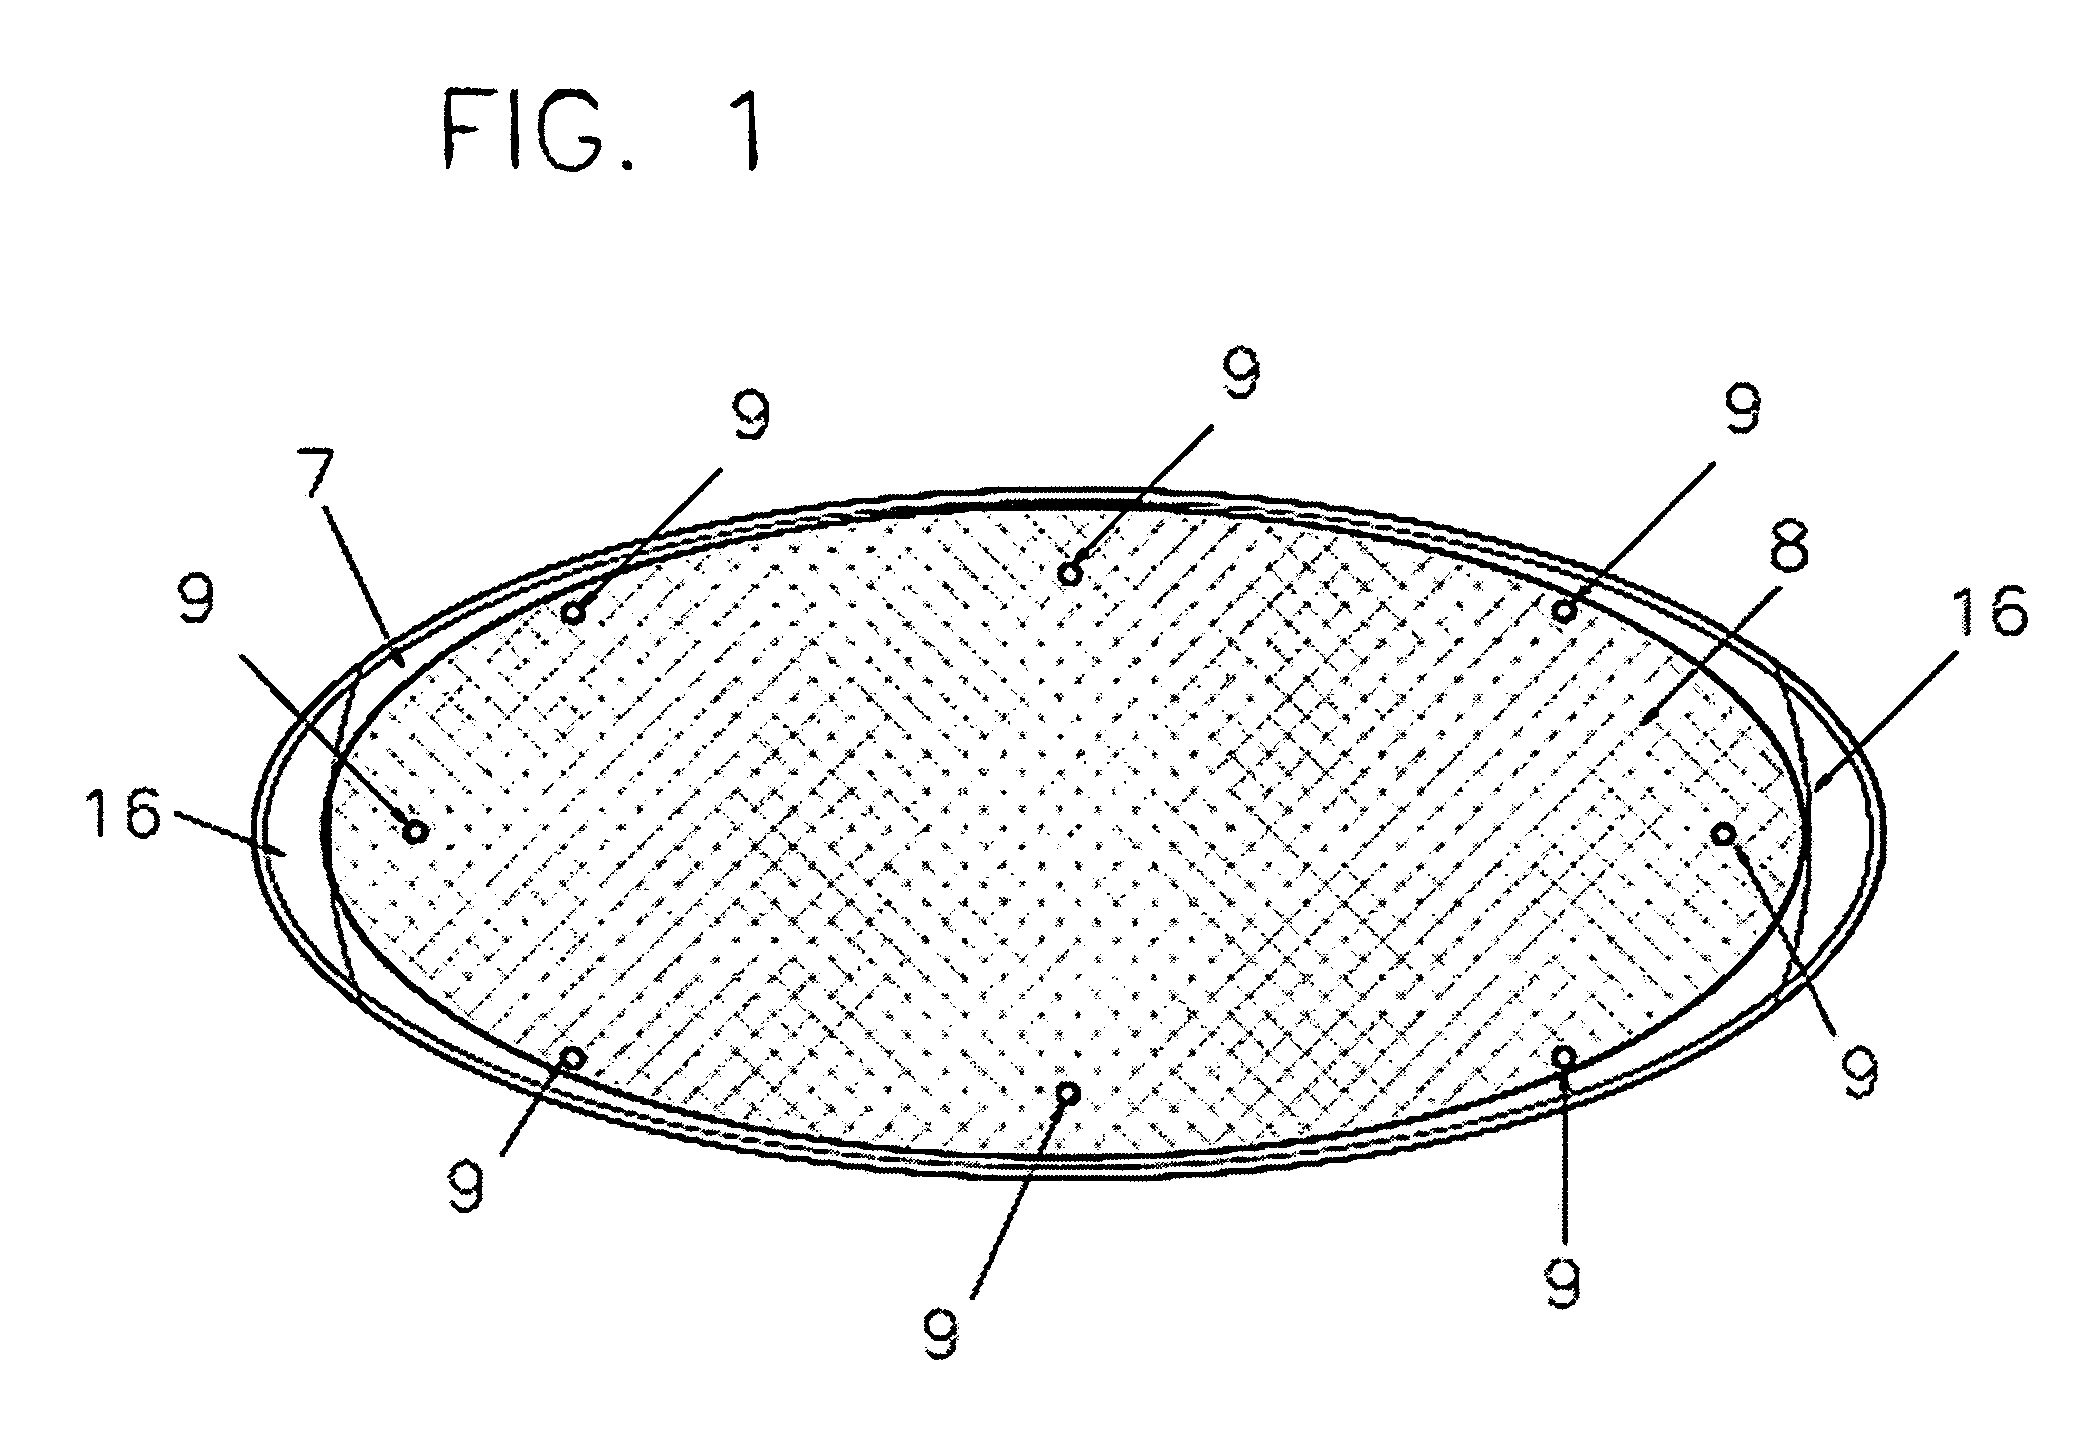 Adjustable balance board with freely moveable sphere fulcrum